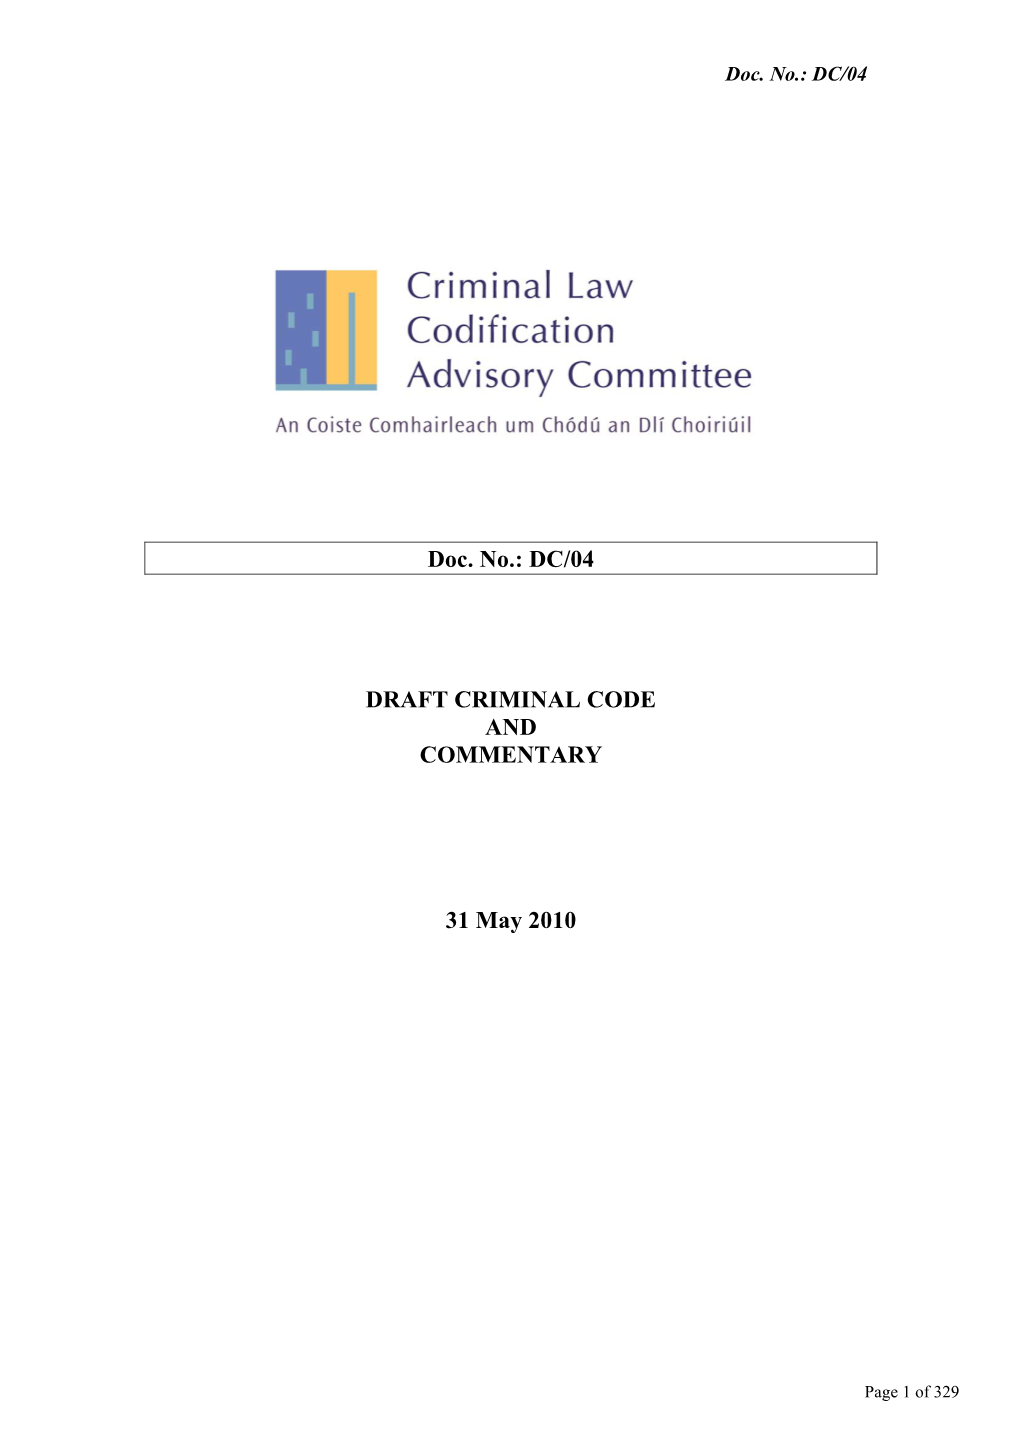 DC/04 DRAFT CRIMINAL CODE and COMMENTARY 31 May 2010